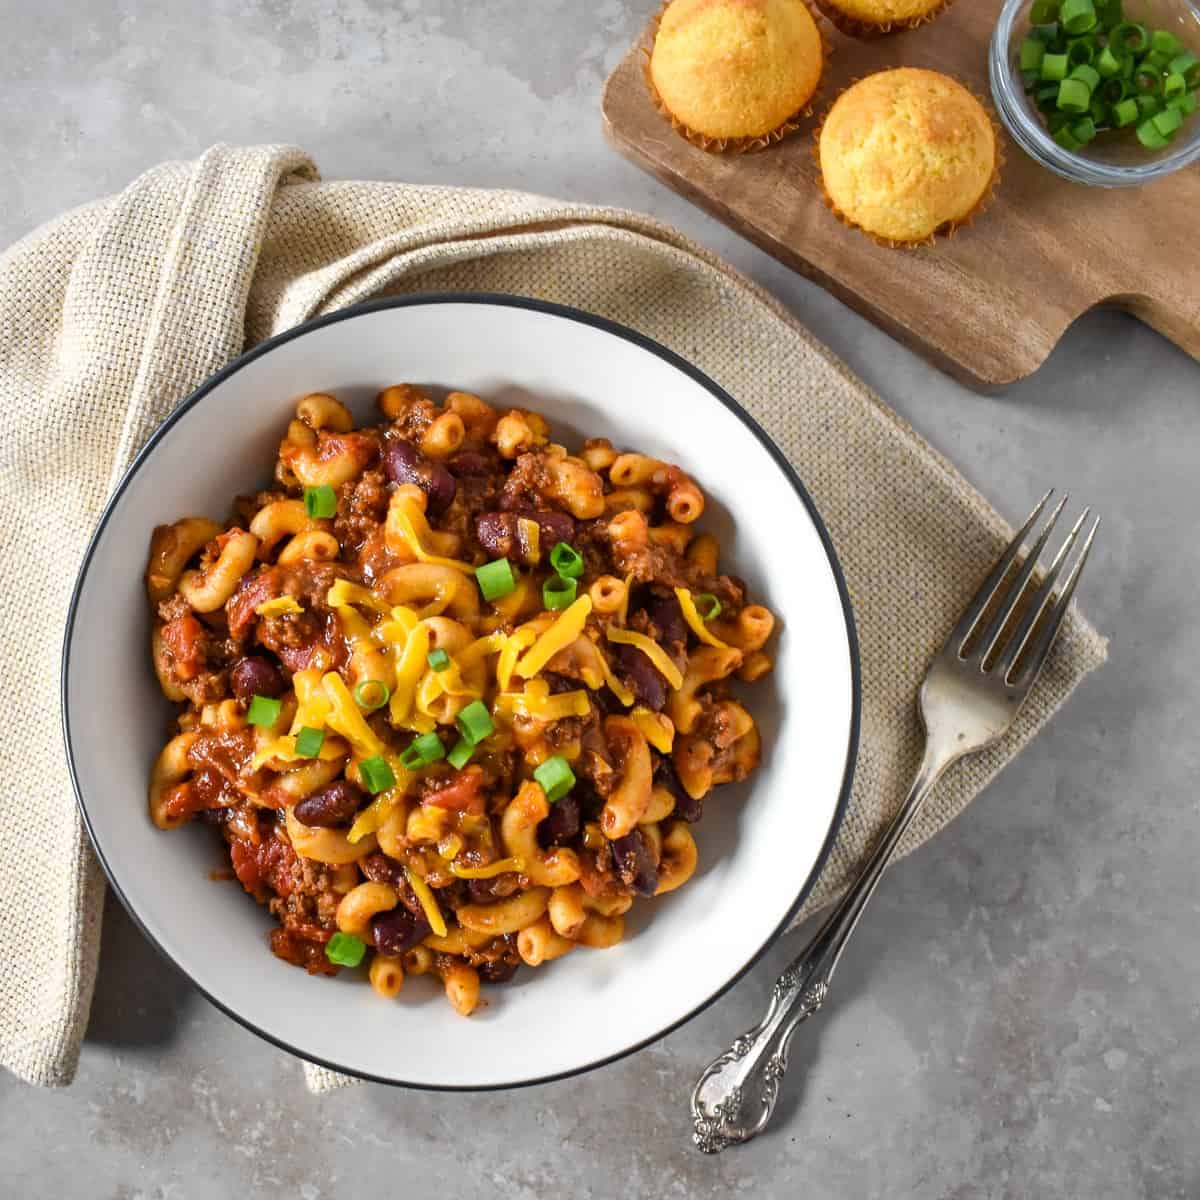 The chili mac served in a white bowl with a black rim, there are mini corn bread muffins and sliced green onions to the top right of the bowl.